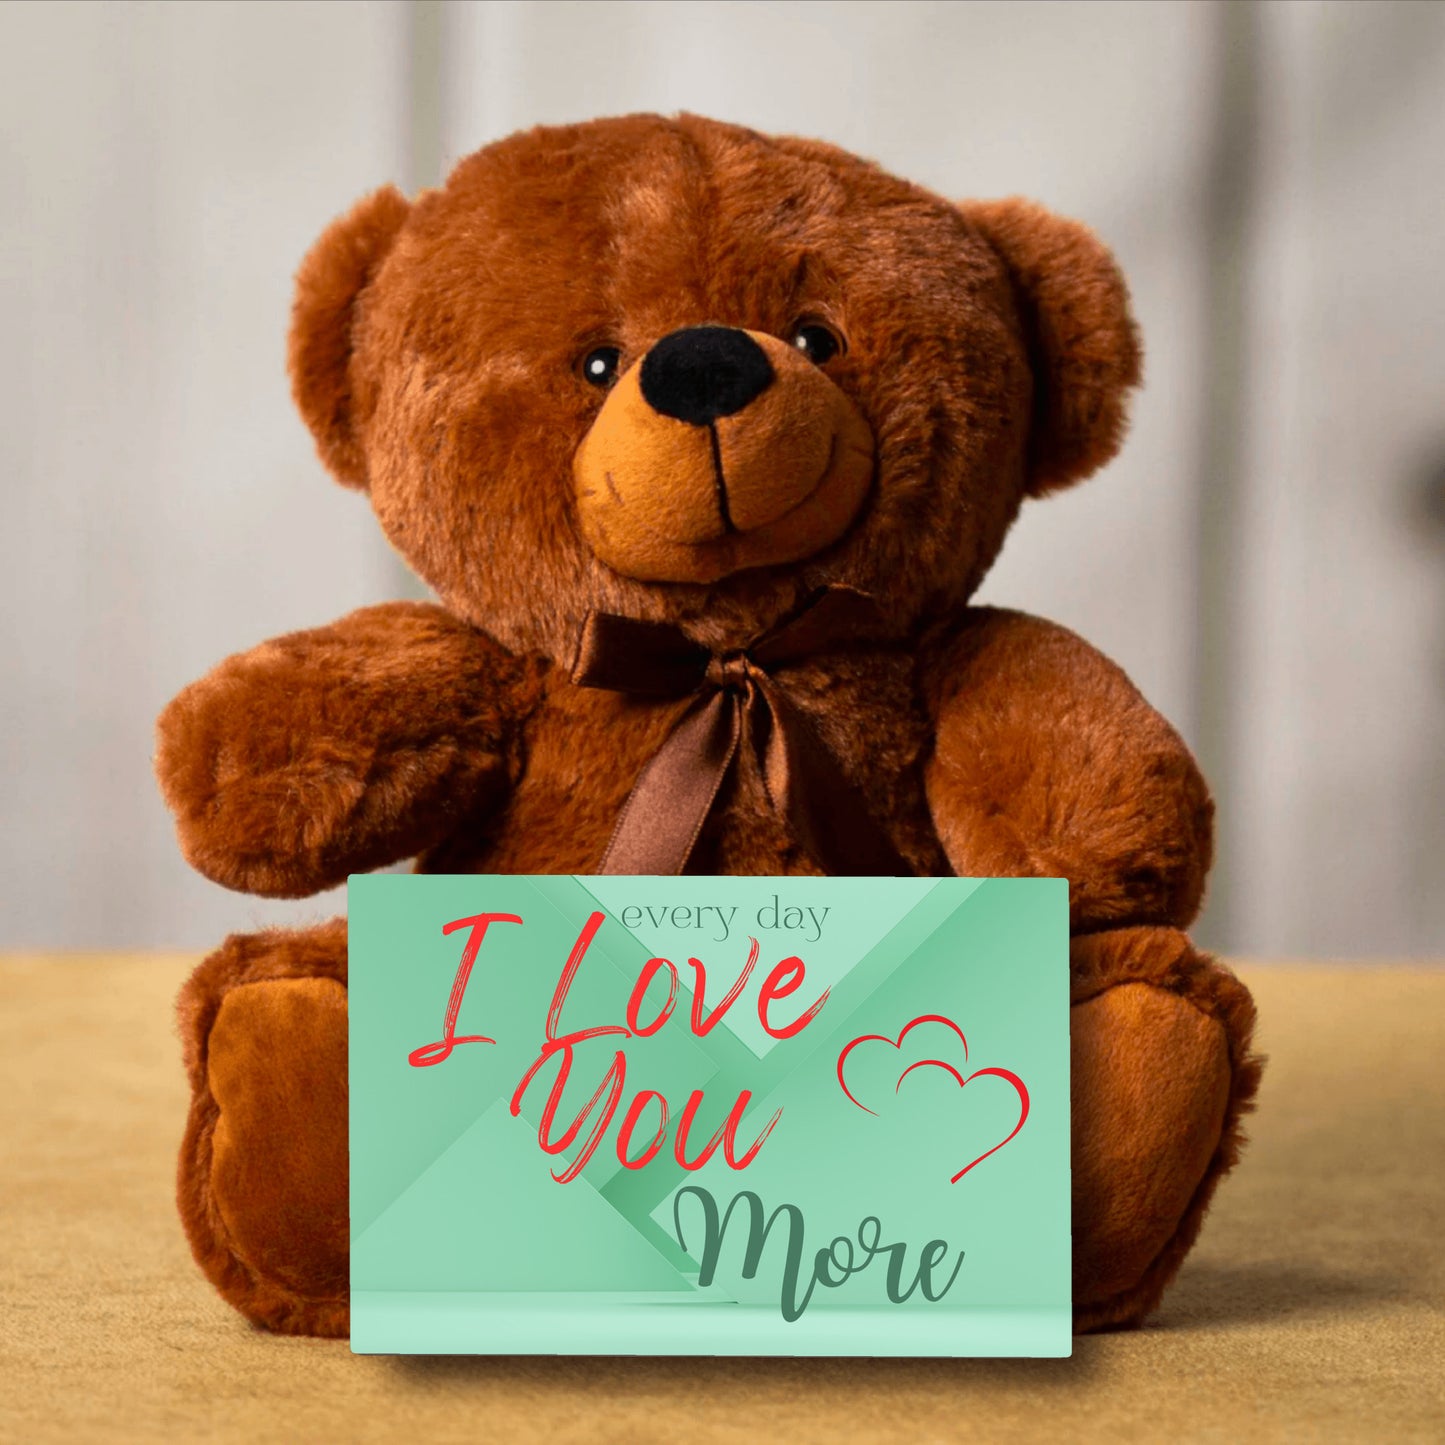 Every Day I Love You More - Teddy Bear